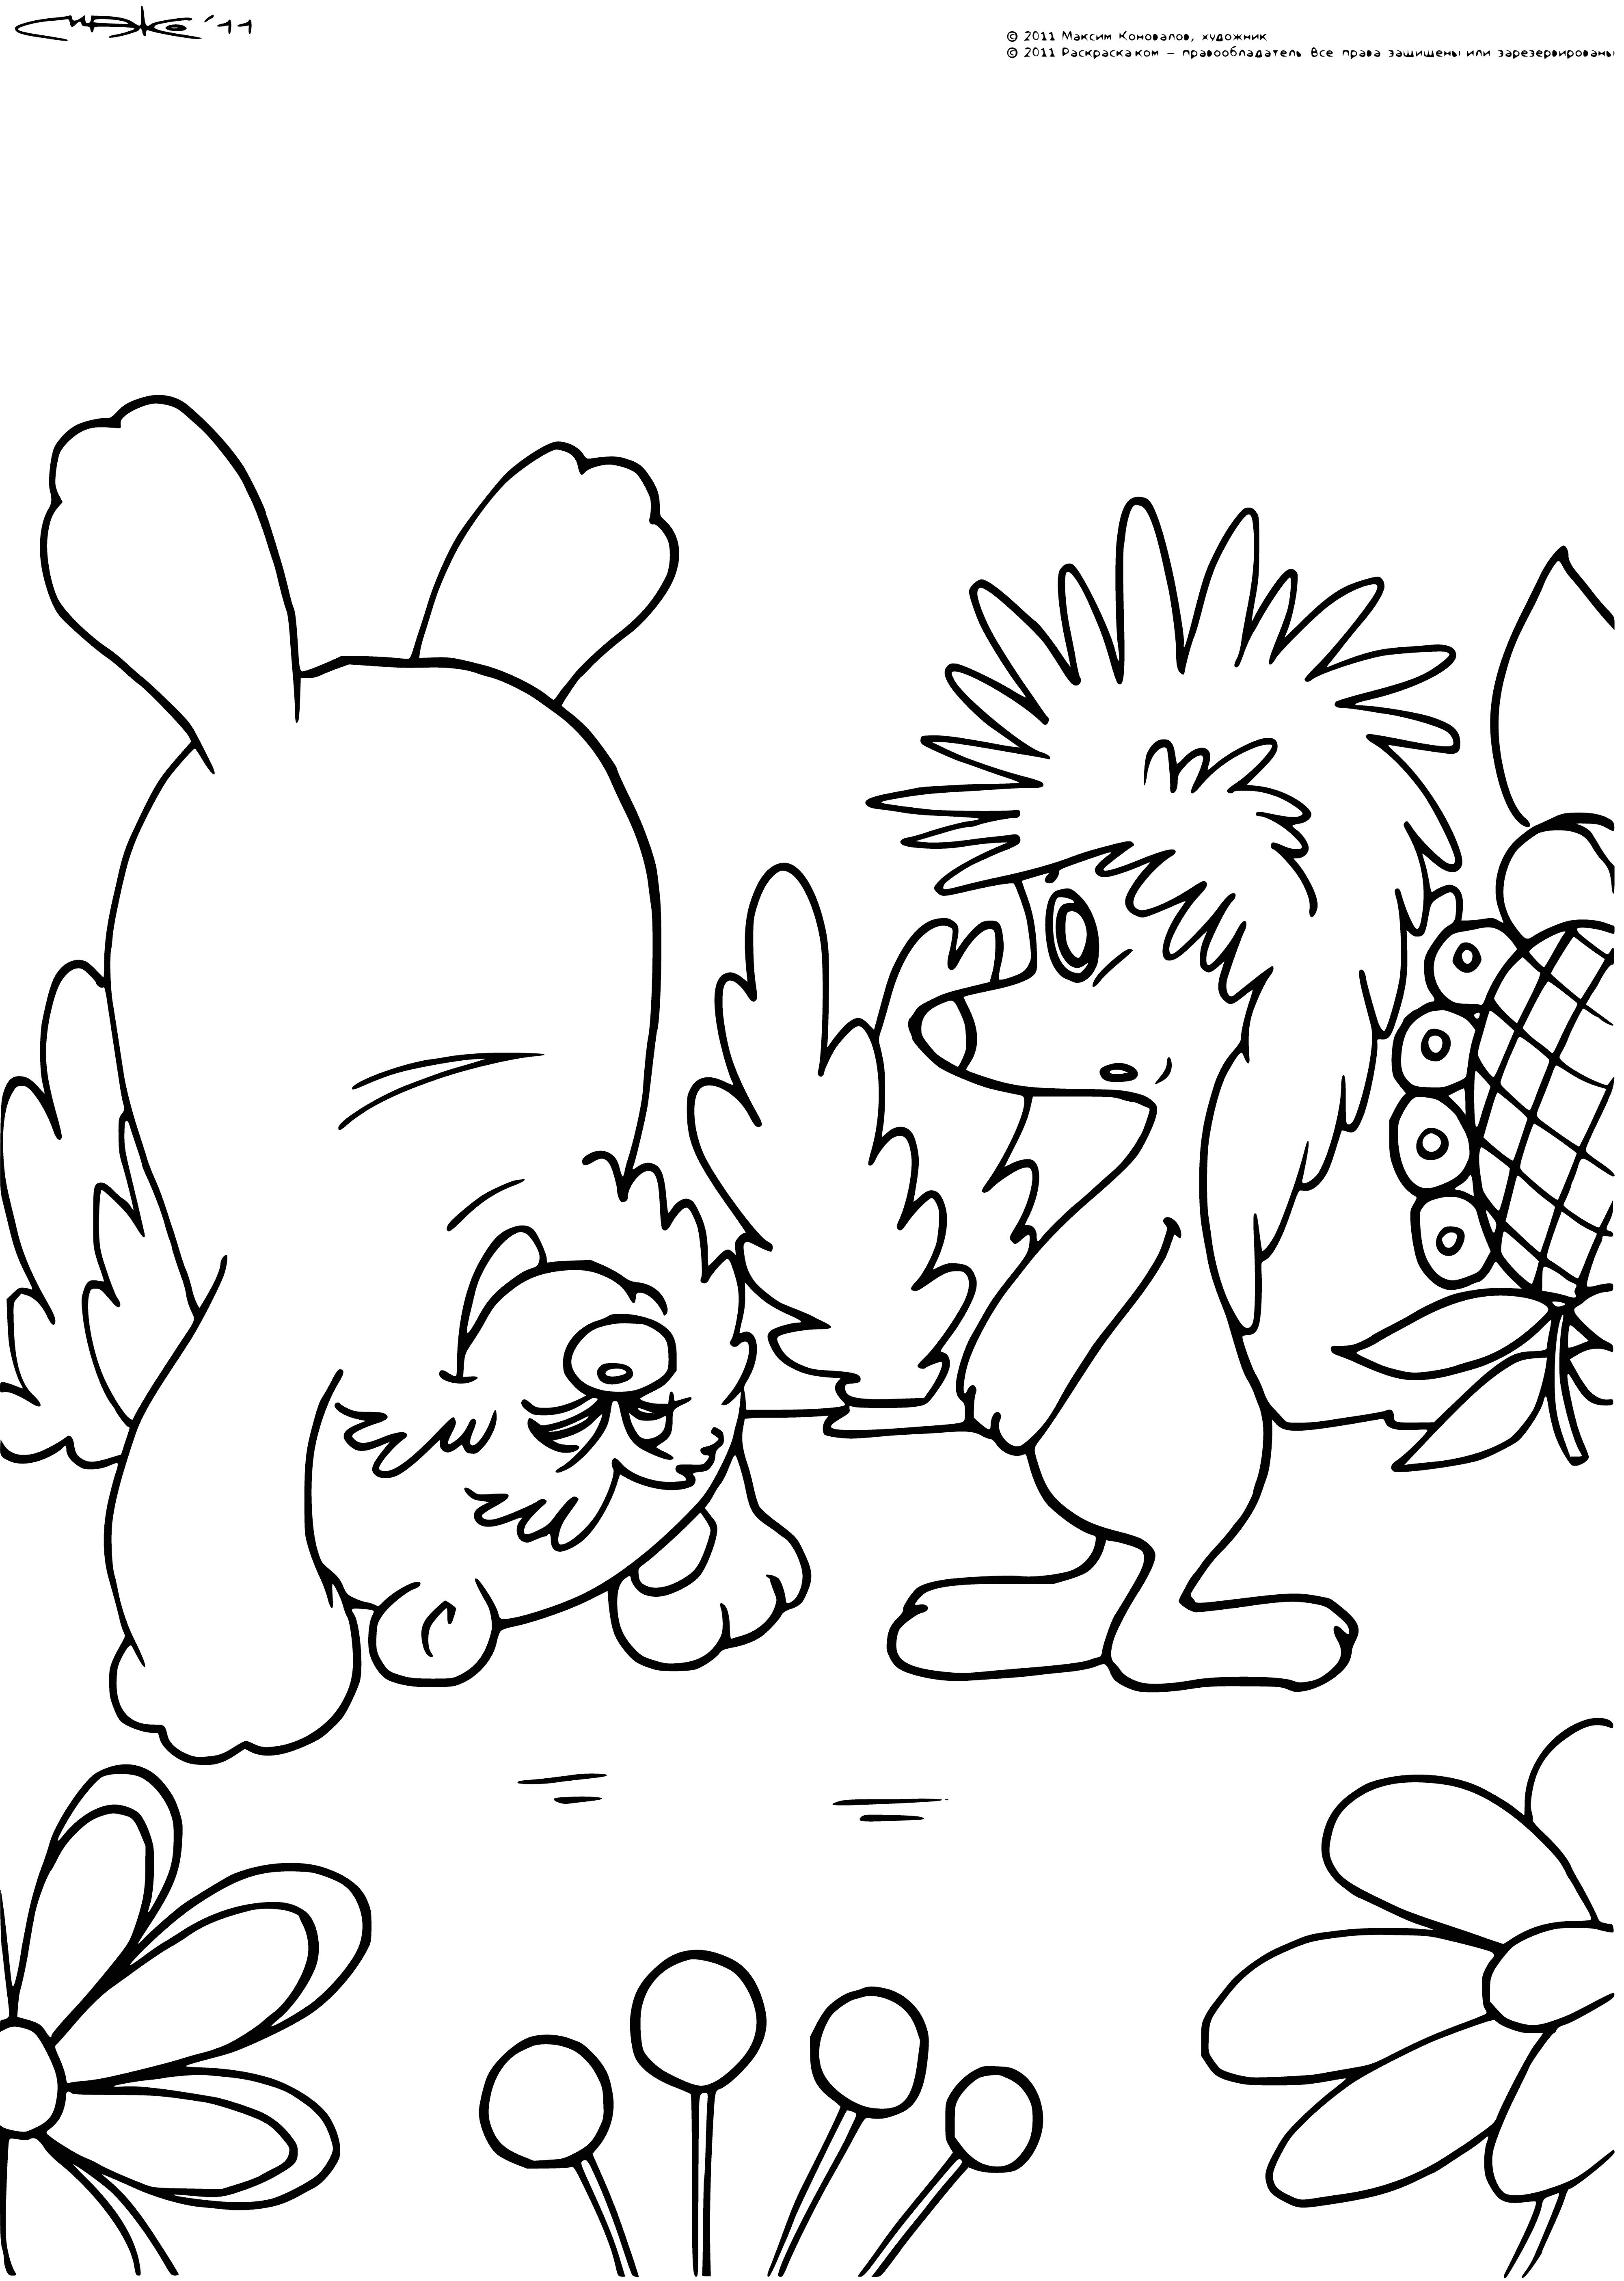 coloring page: Two friends, hedgehog and bear, upside down walking; everyone else in the same page follows!